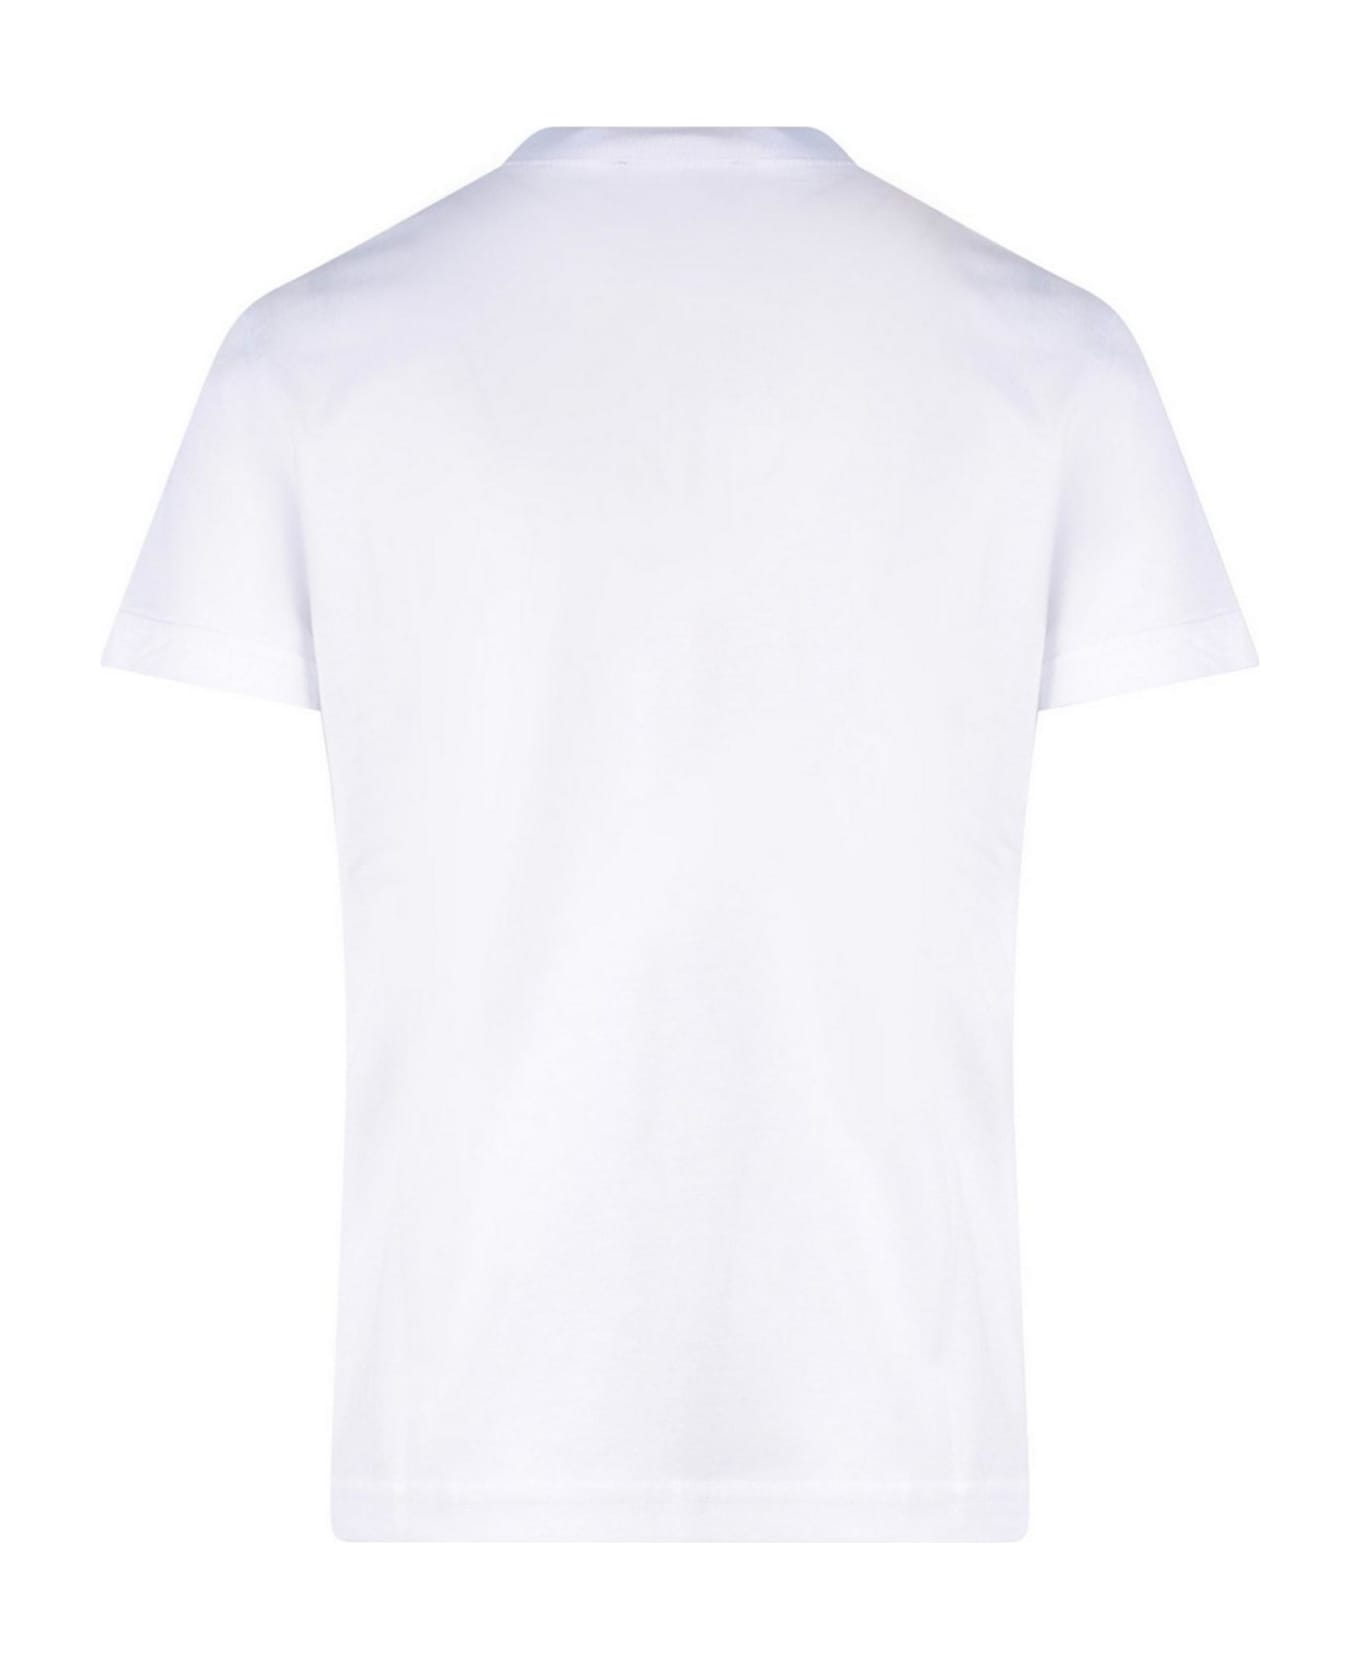 Versace Jeans Couture White T-shirt - White